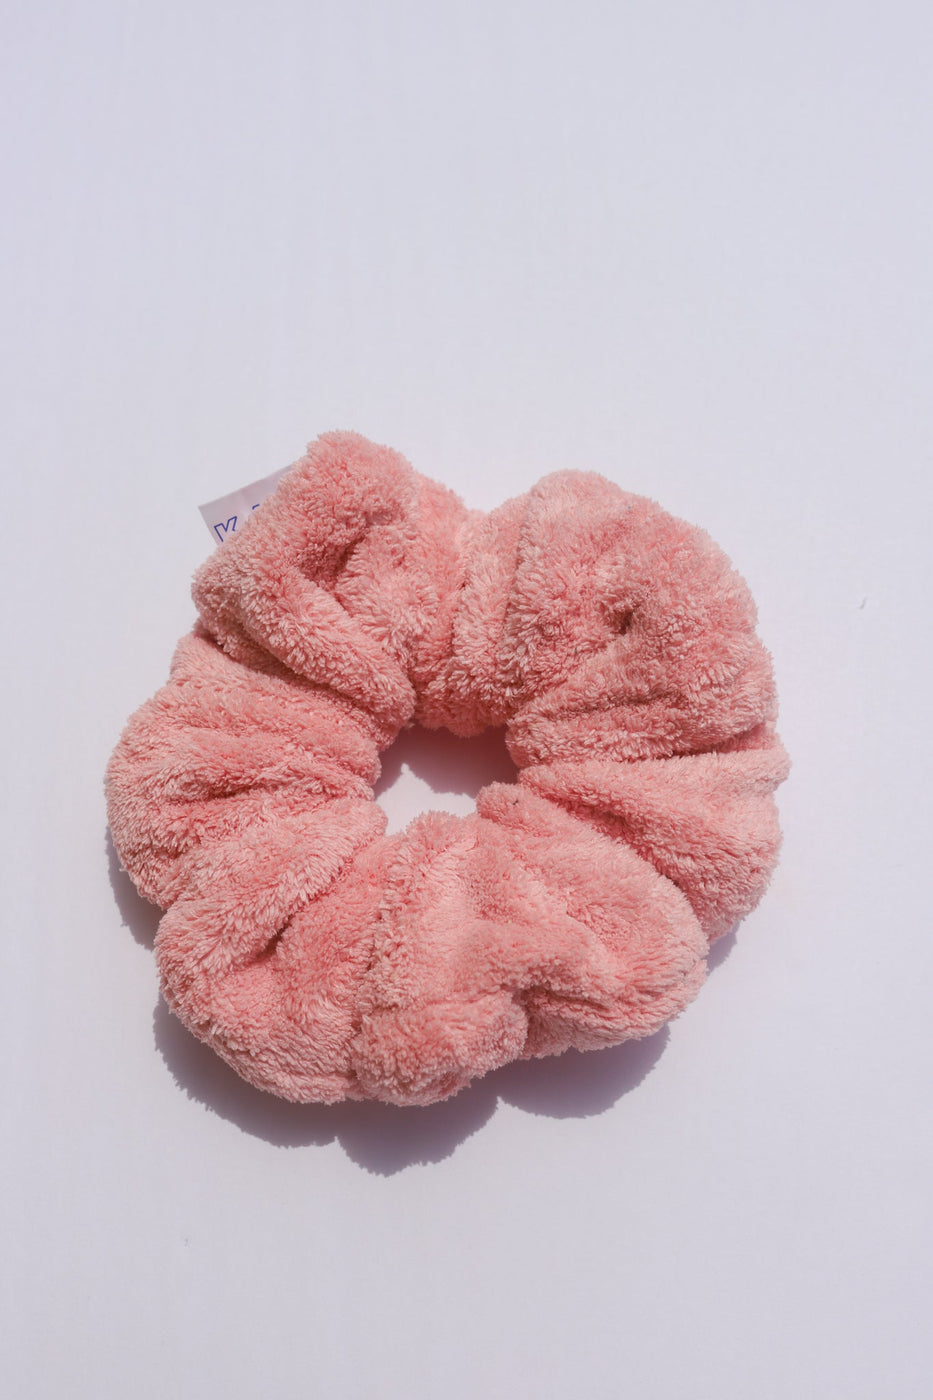 a pink hair scrunchie on a white surface